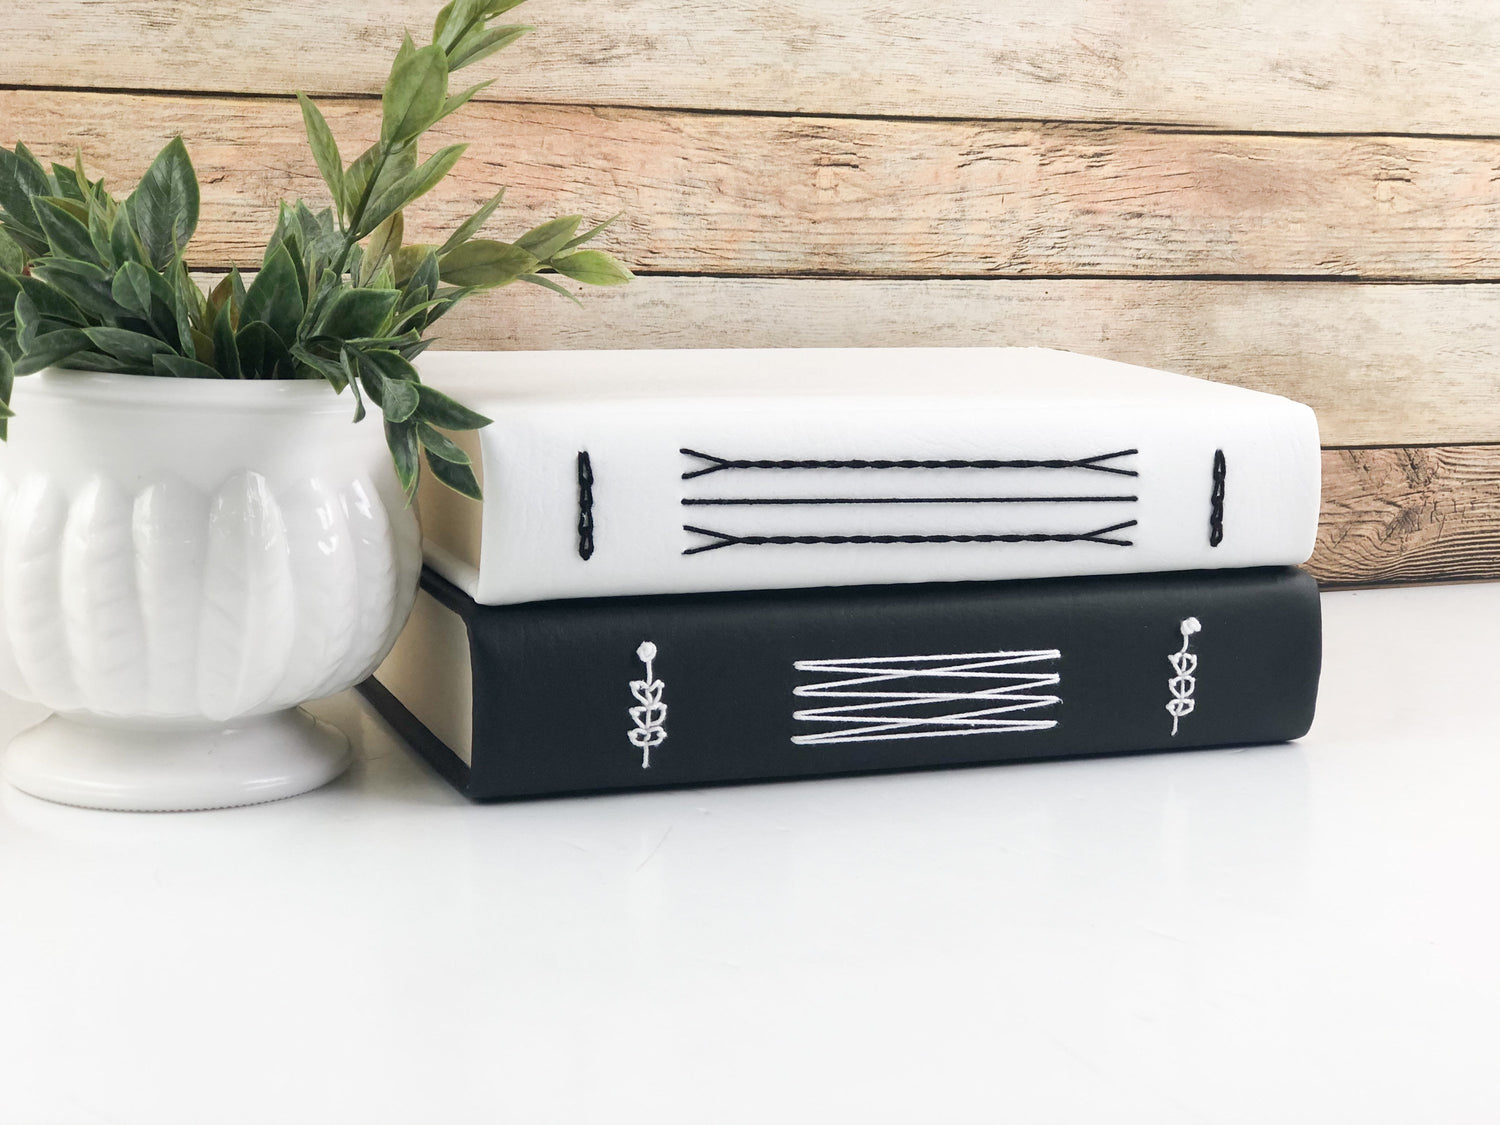 Modern Home Decor / Black and White / Embroidered Book Set